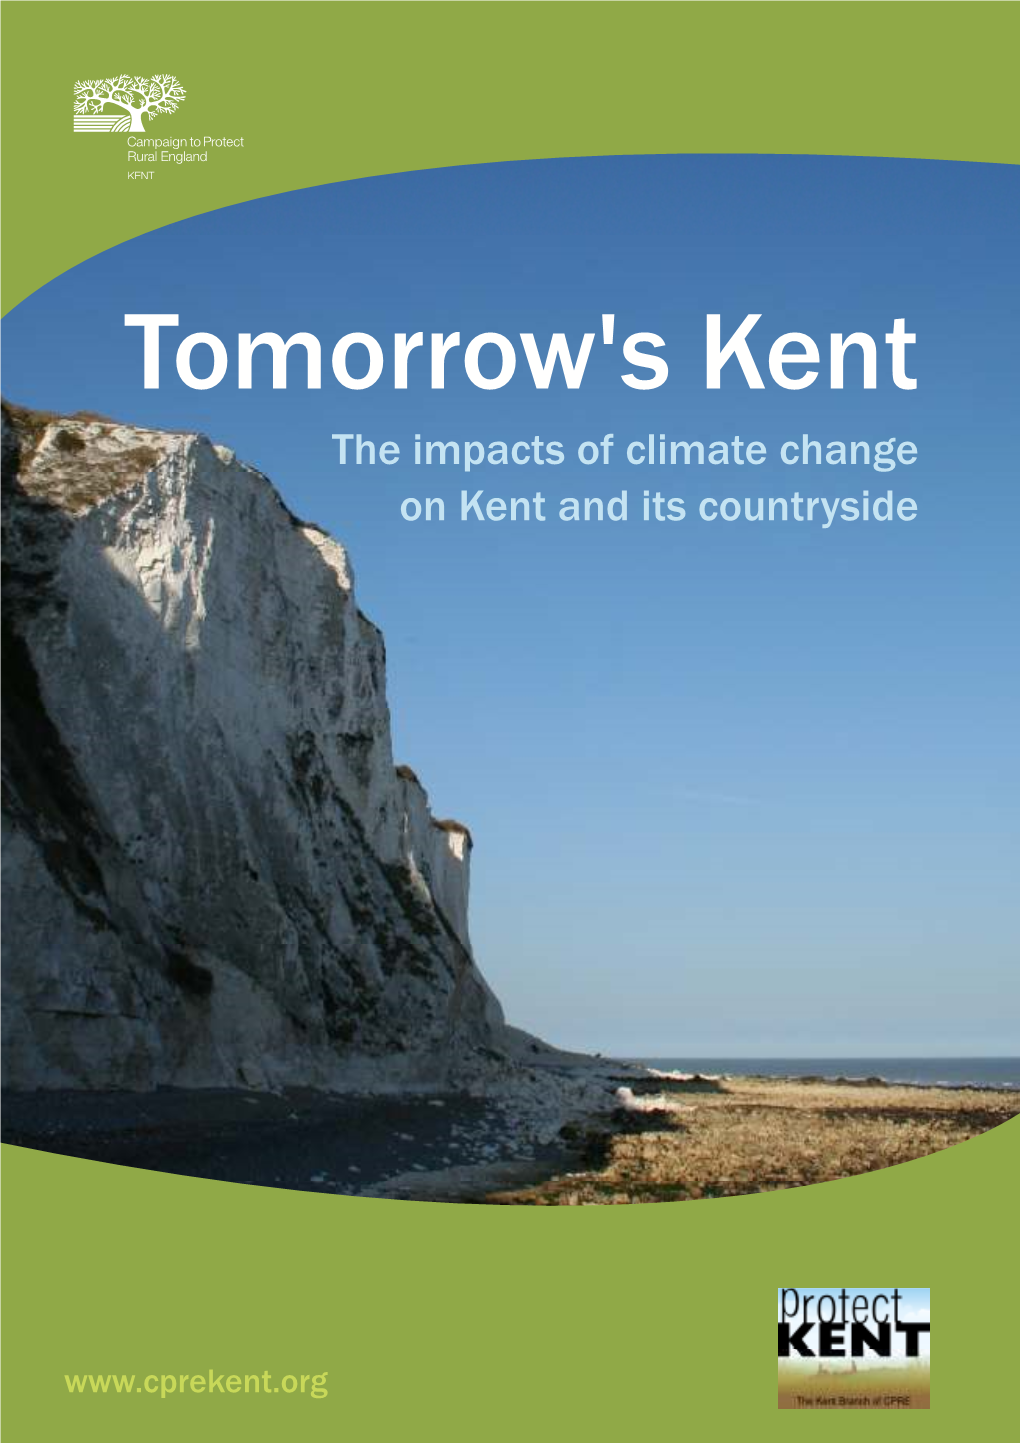 The Impacts of Climate Change on Kent and Its Countryside